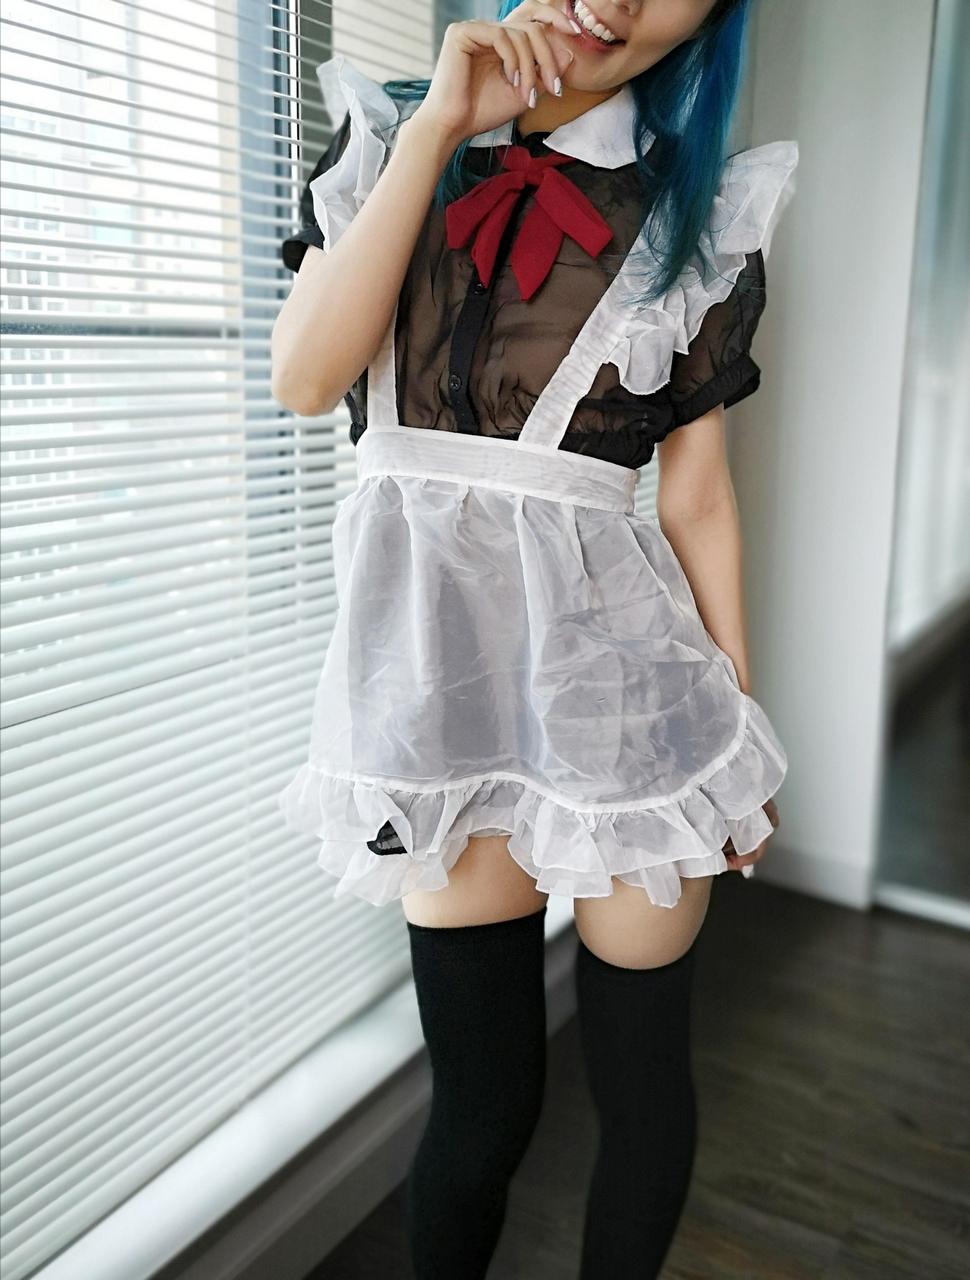 All Sheer Is My Favourite Way To Dress Up As A Little Mai